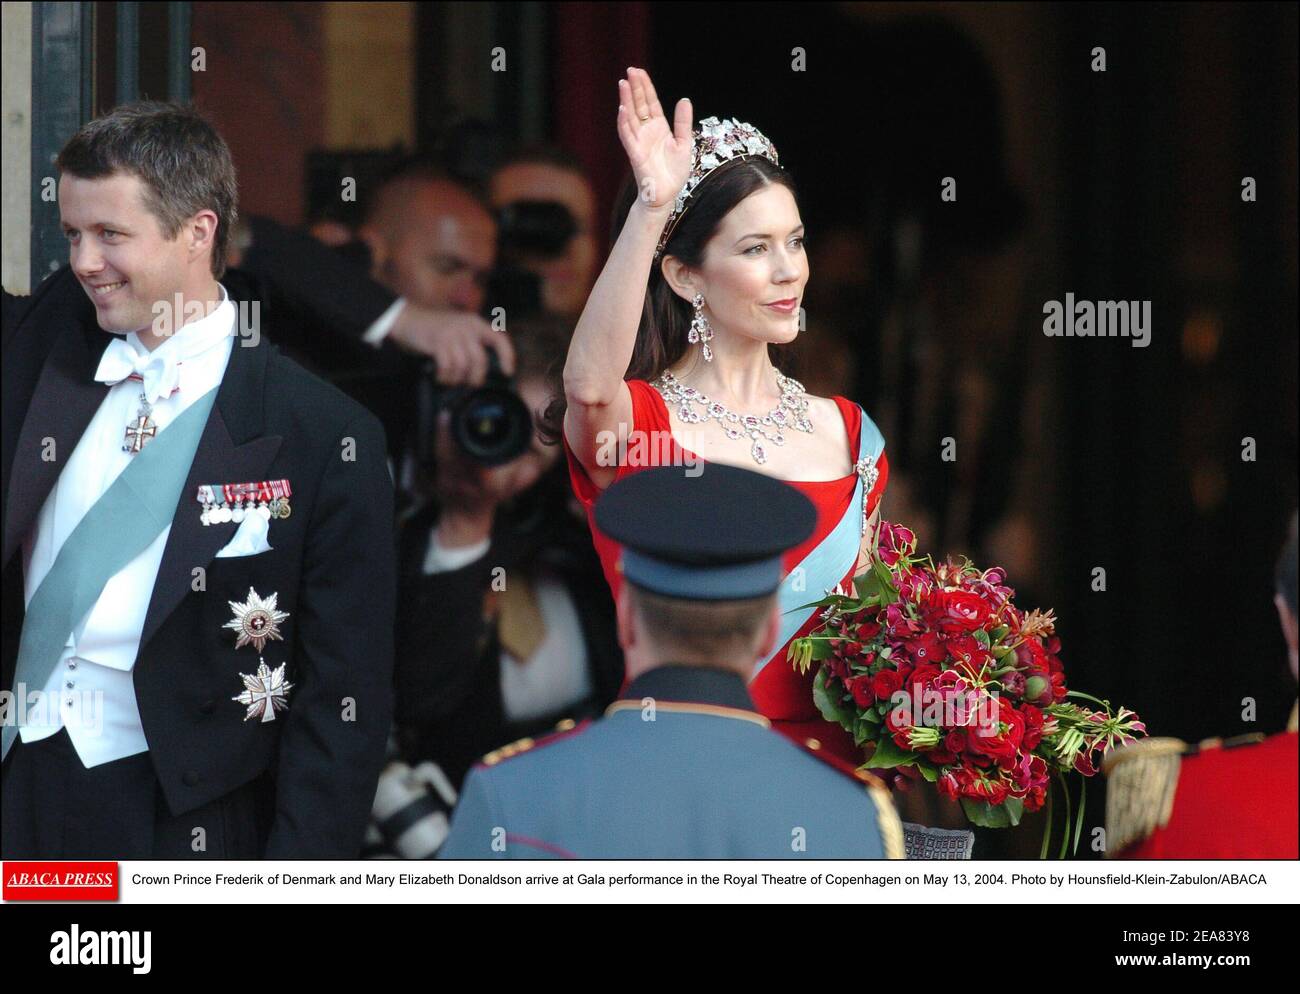 Crown Prince Frederik of Denmark and Mary Elizabeth Donaldson arrive at Gala performance in the Royal Theatre of Copenhagen on May 13, 2004. Photo by Hounsfield-Klein-Zabulon/ABACA Stock Photo